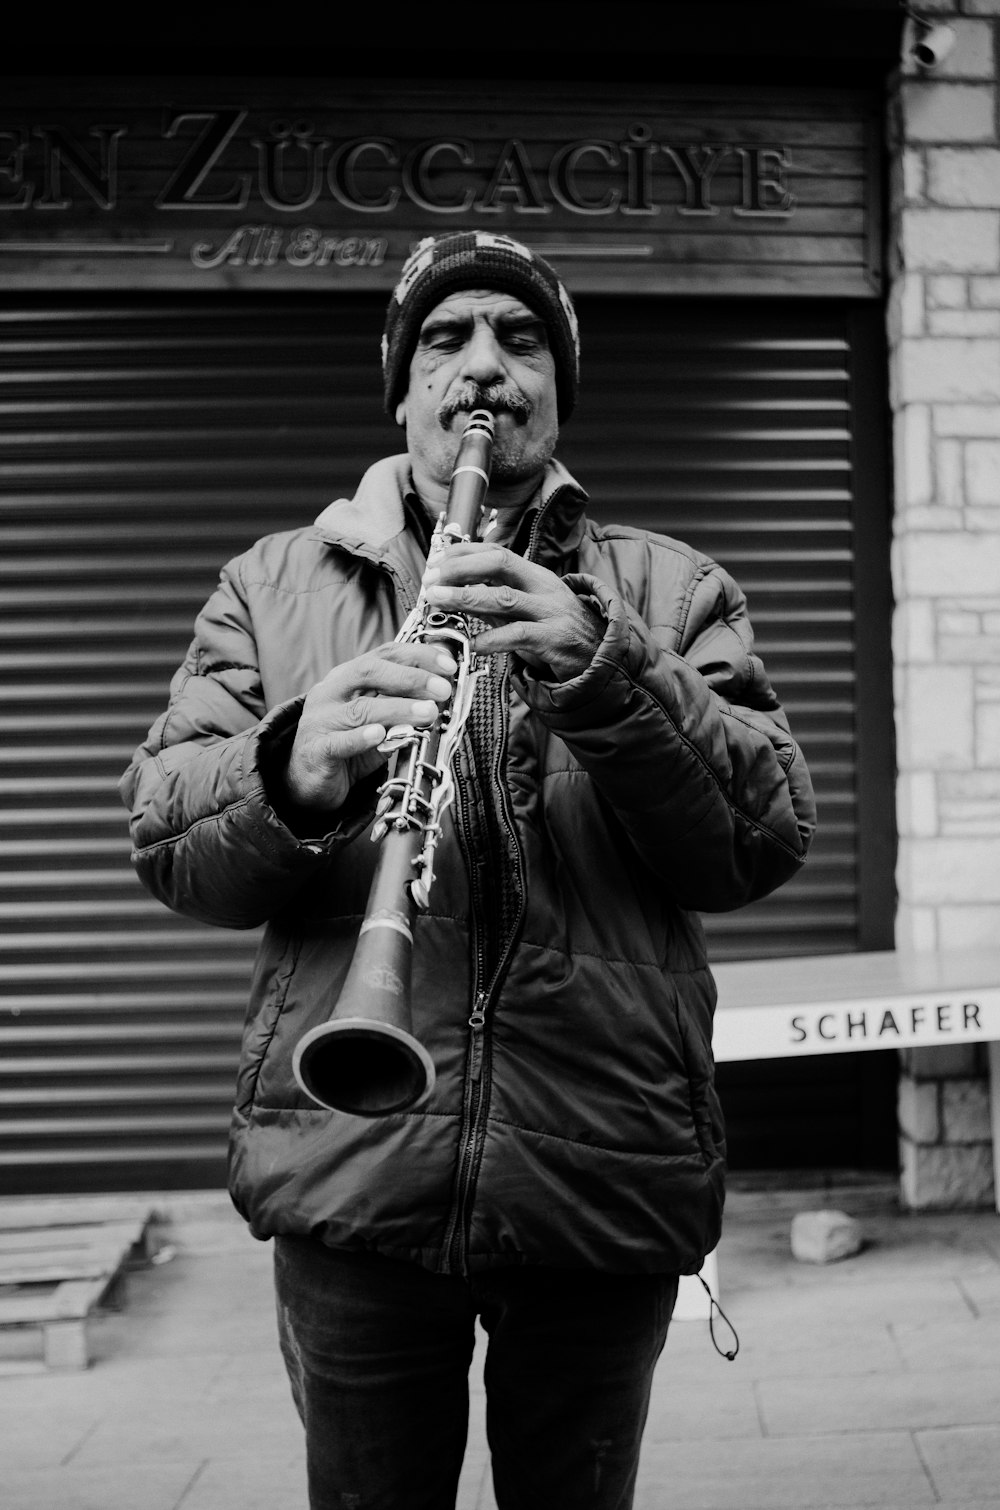 a man playing a trumpet in front of a building